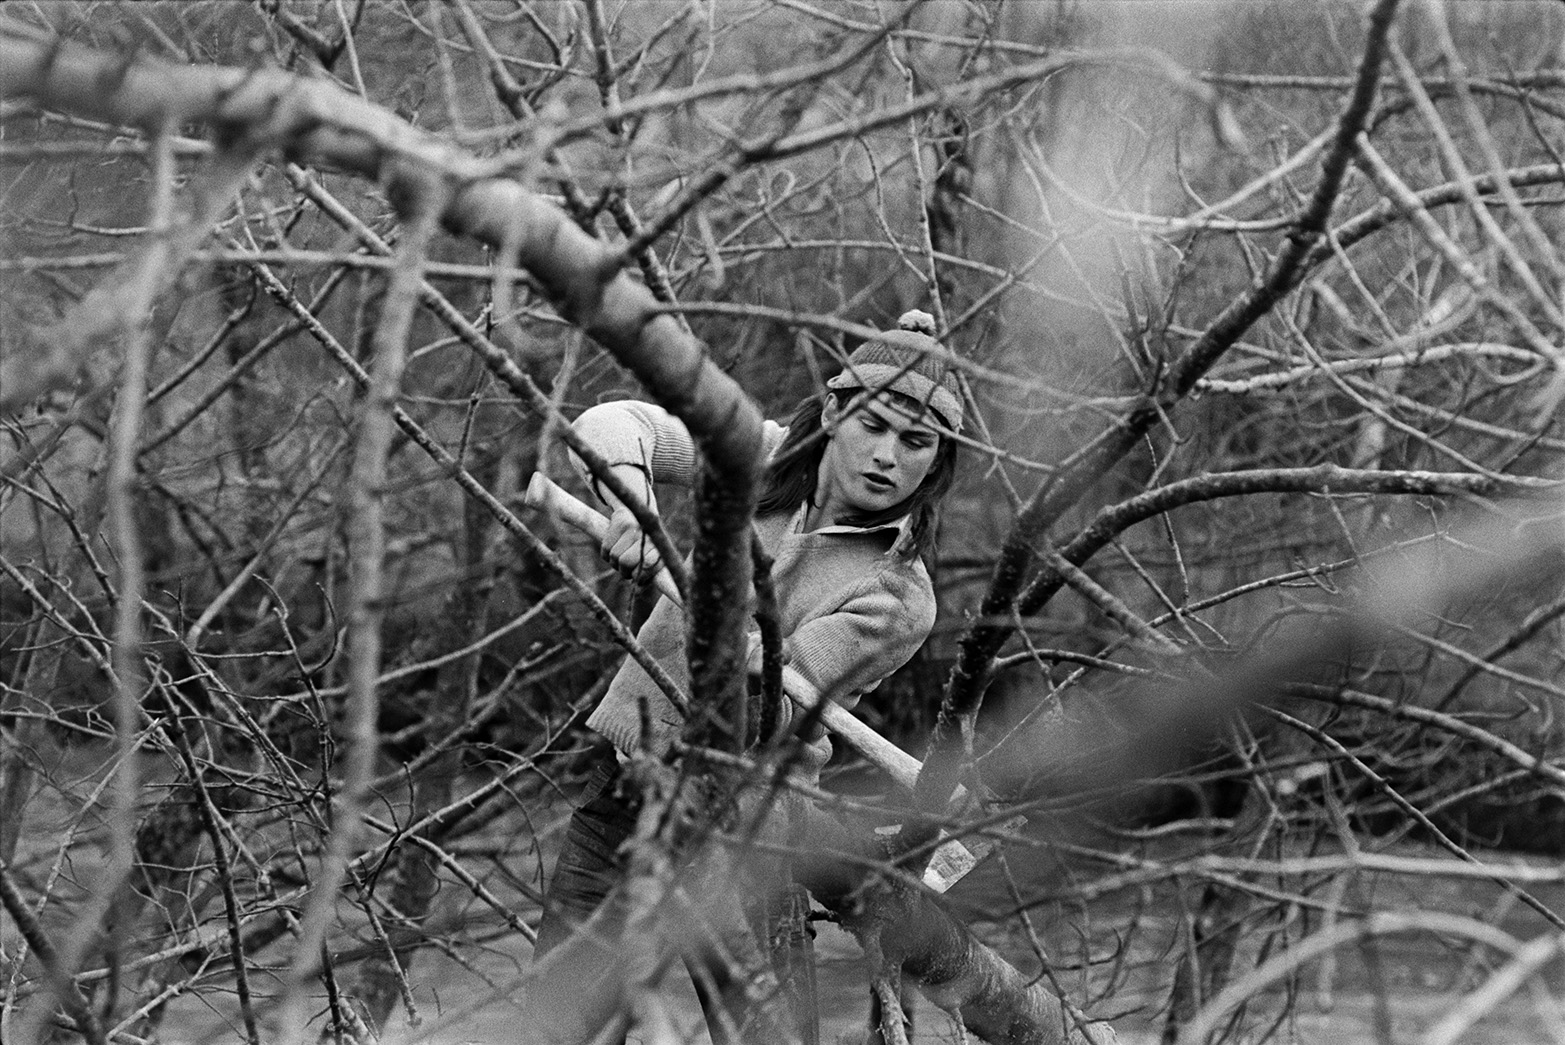 Derek Bright using an axe to cut branches off trees by the River Torridge in a field at Mill Road Farm, near Beaford Bridge. The farm was also known as Jeffrys.